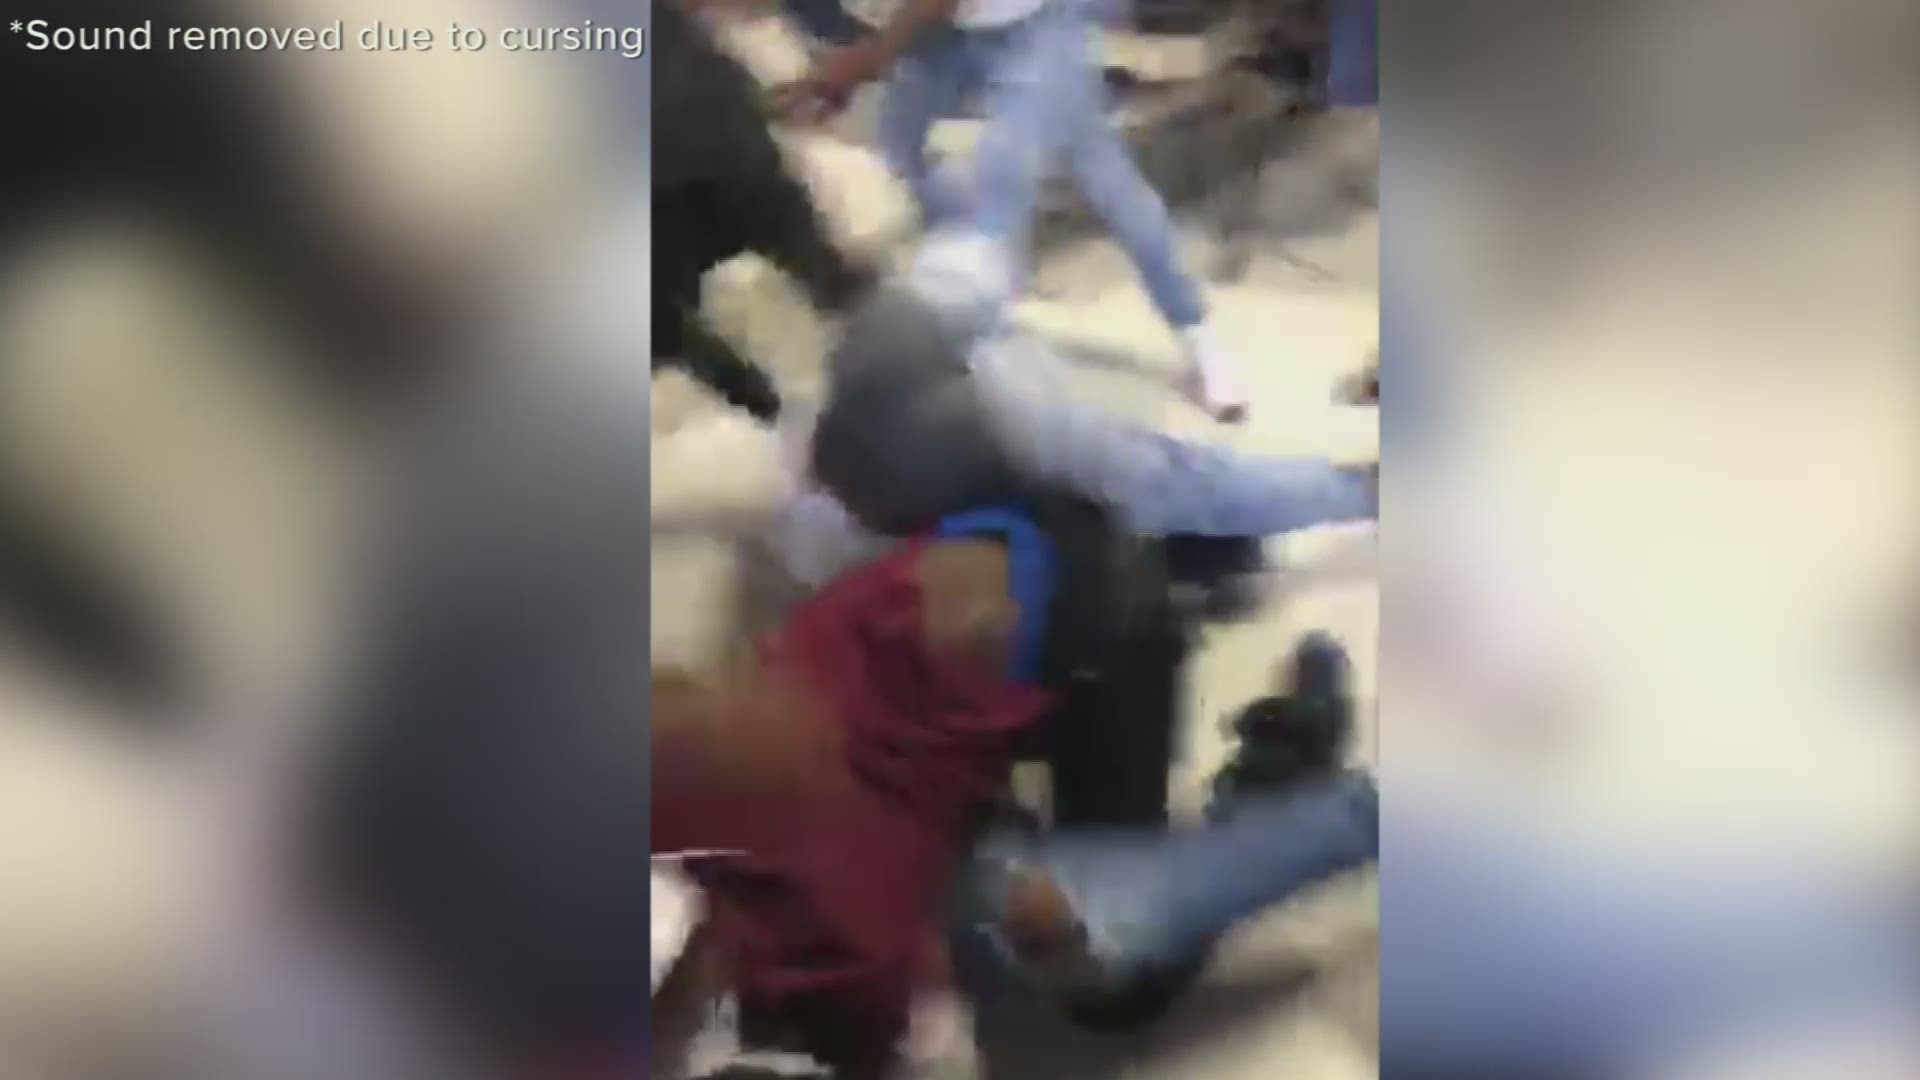 A fight broke out at Norfolk's Norview High School on Feb. 5, 2019.